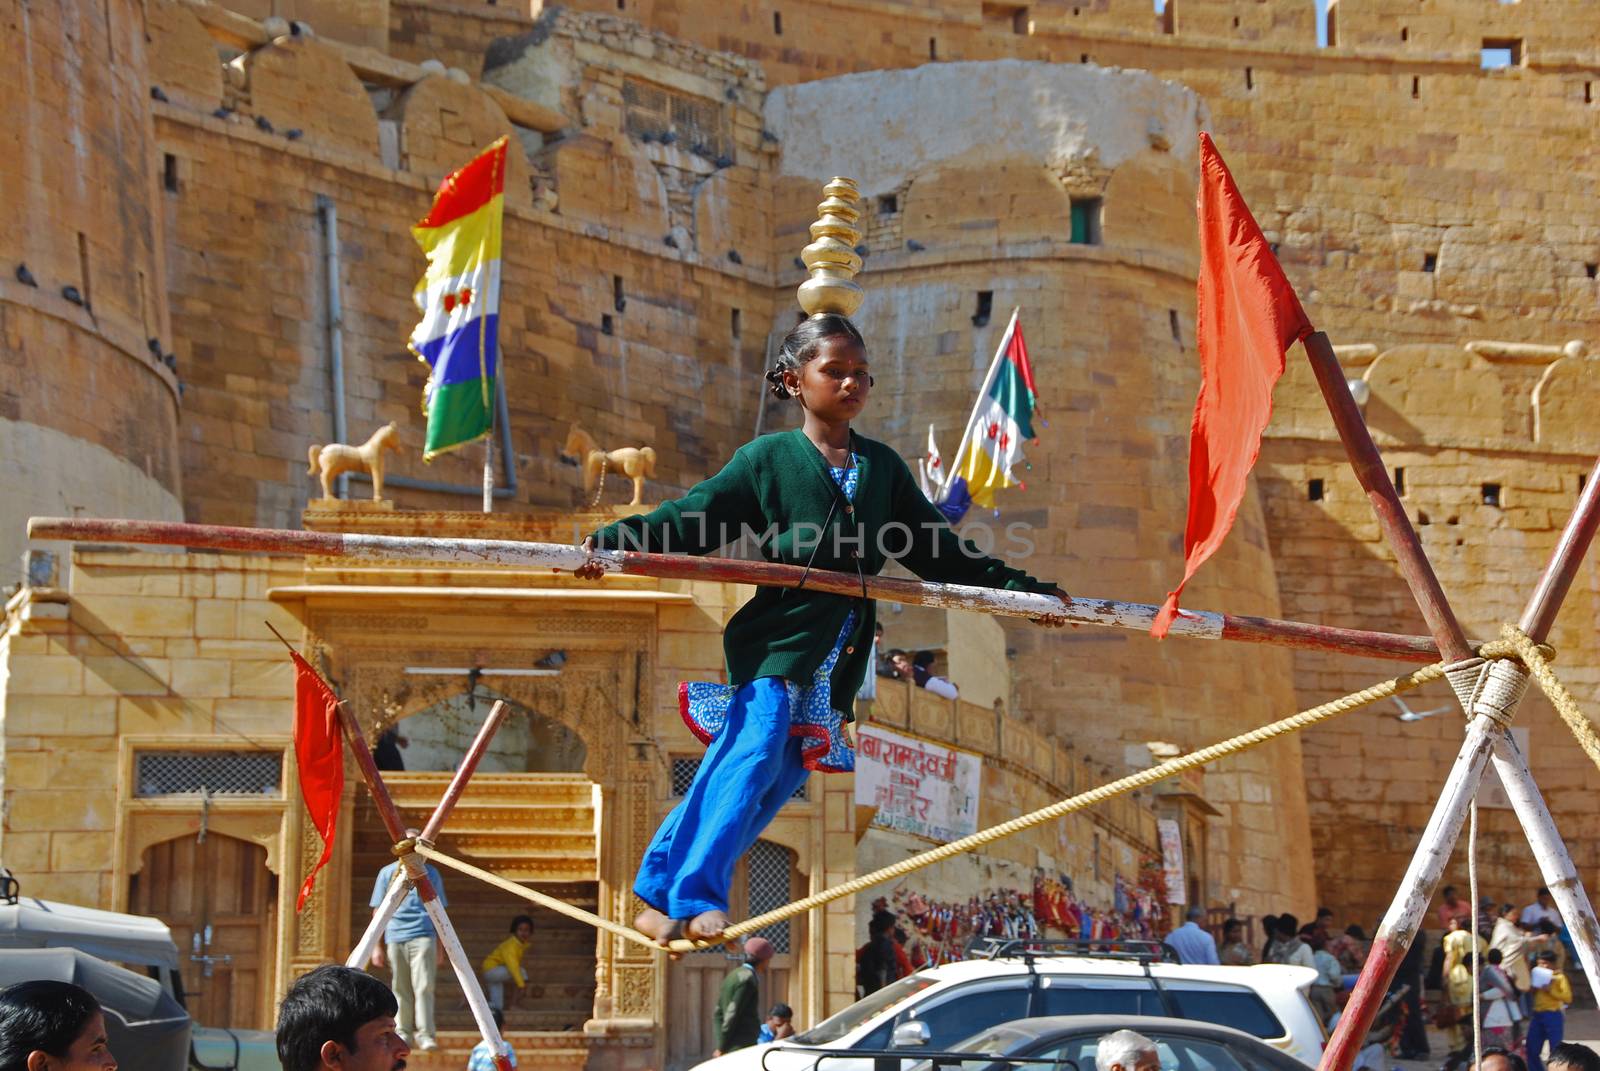 A young lady on a tightrope at an outdoor market in Jaisalmer, India
31 Dec 2008
No model release
Editorial only